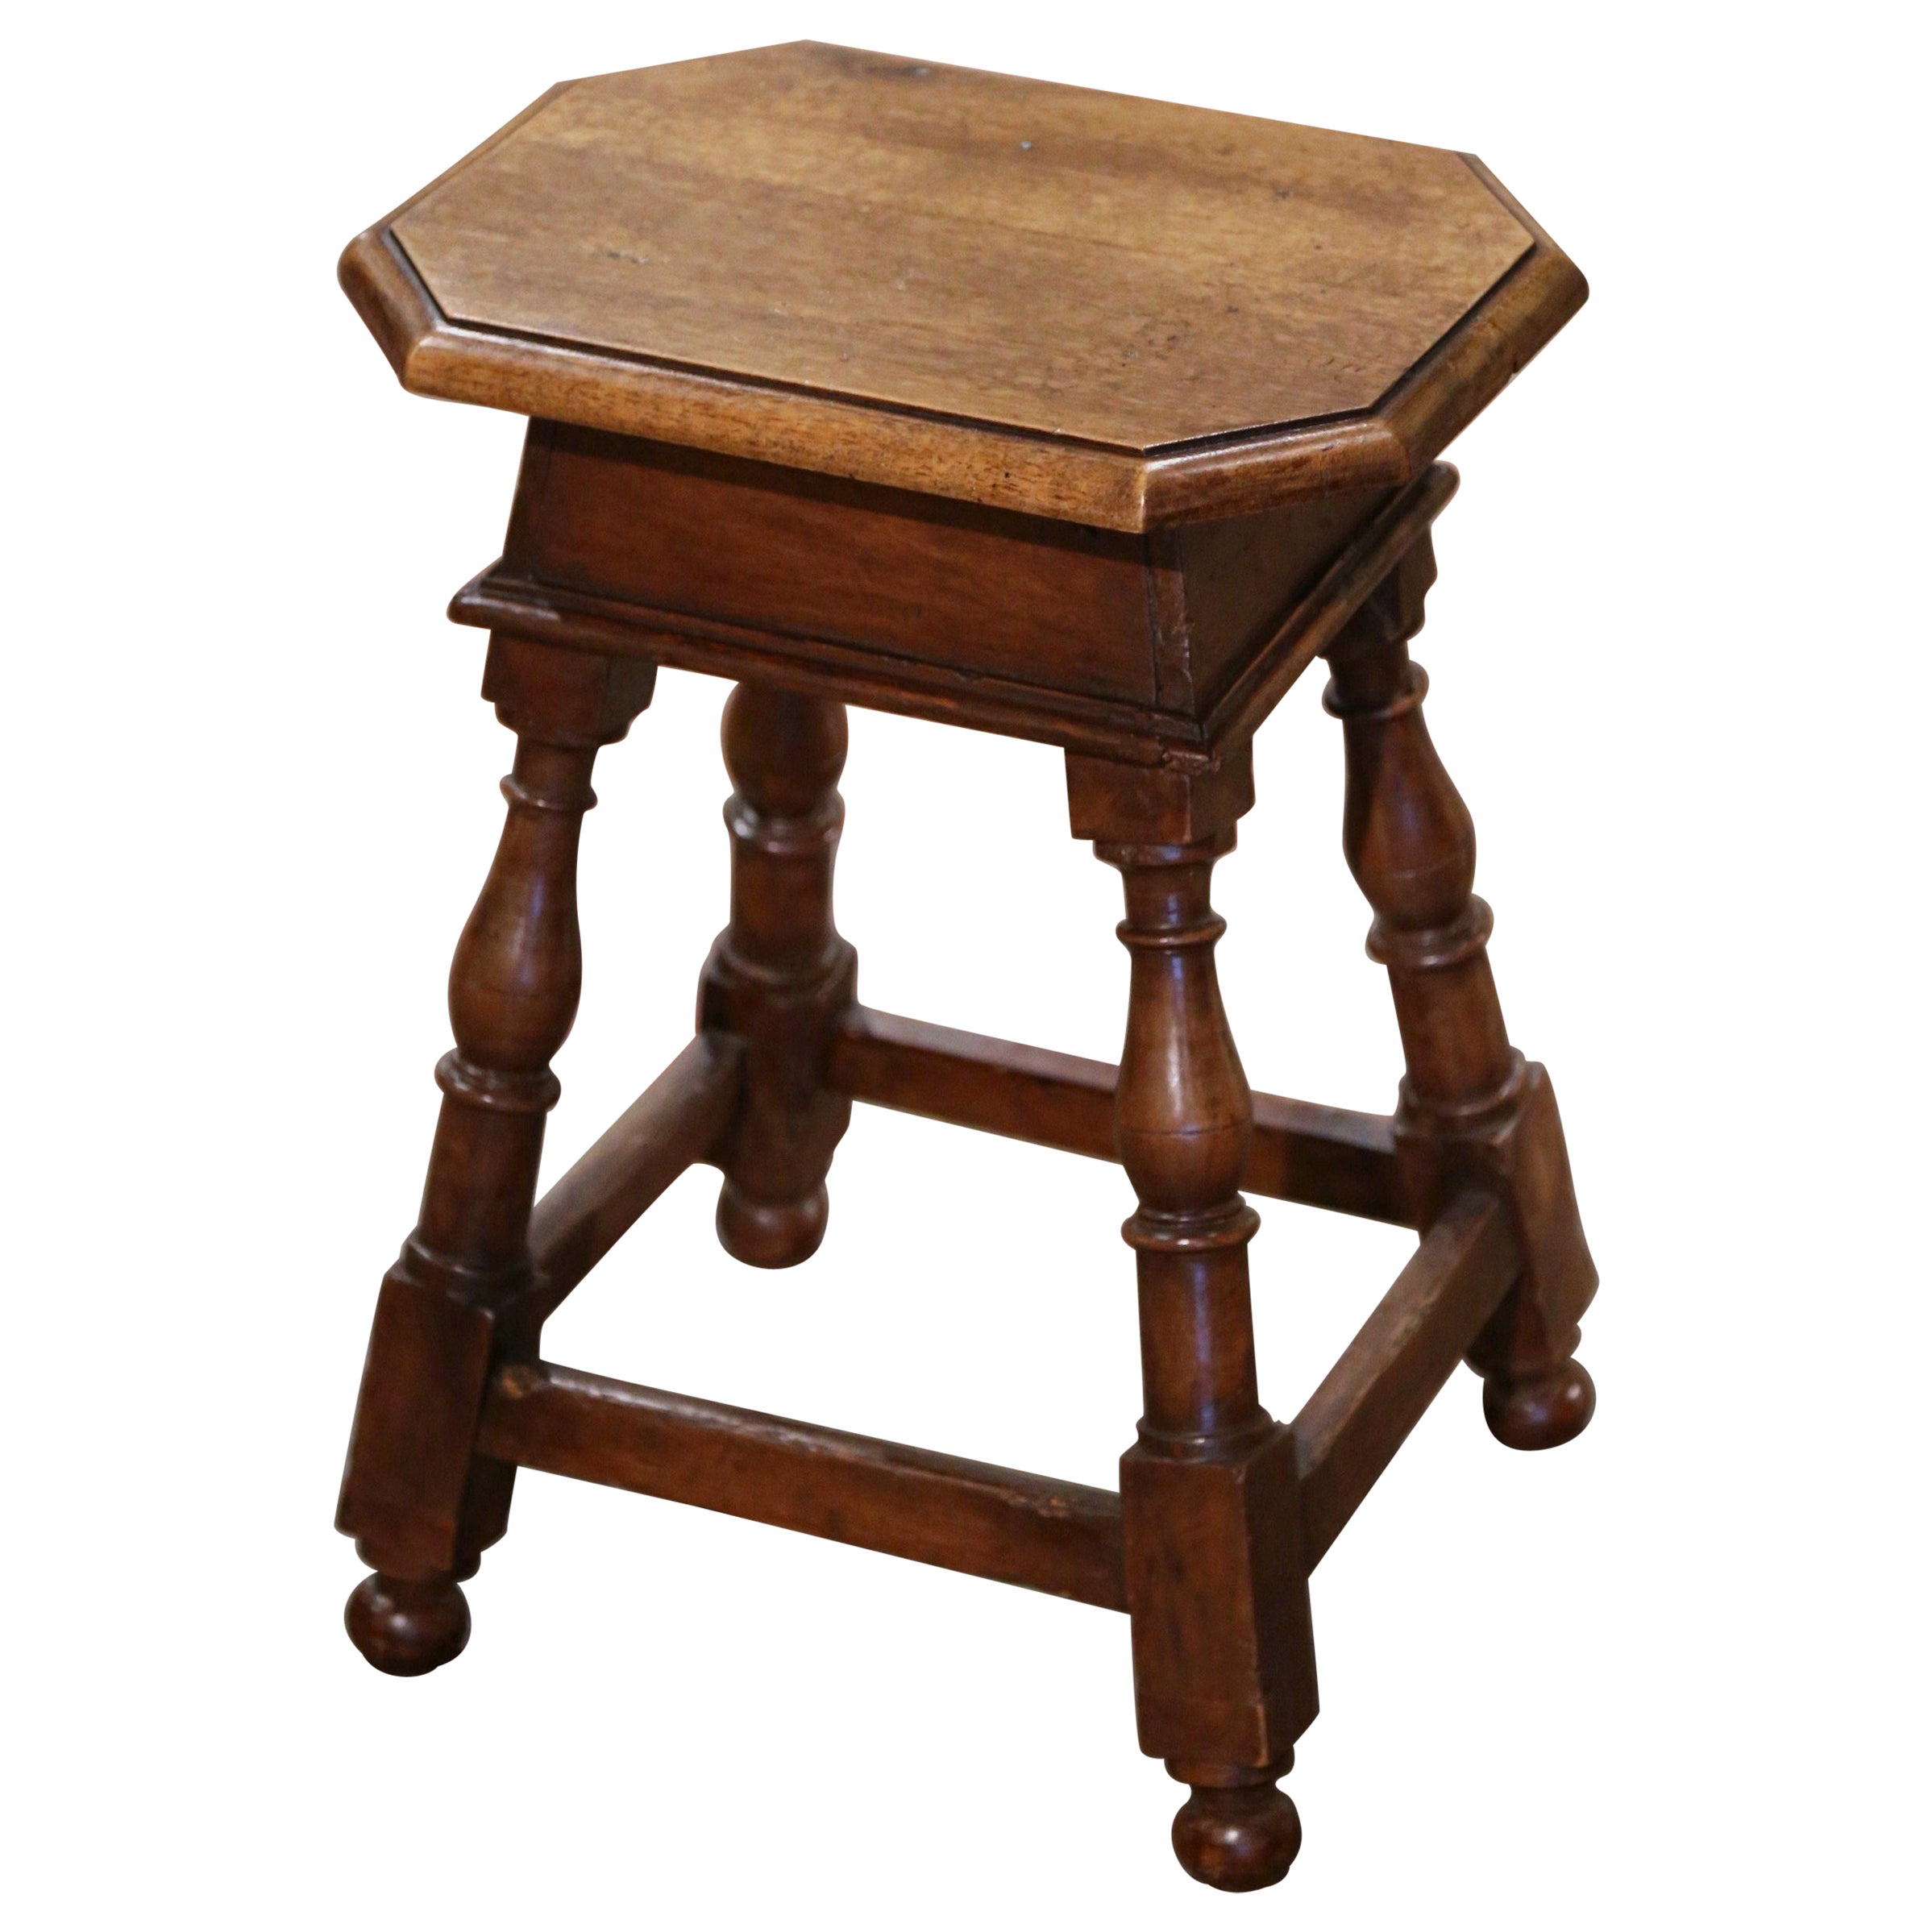 19th Century French Louis XIII Carved Walnut Turned Legs Octagonal Stool 